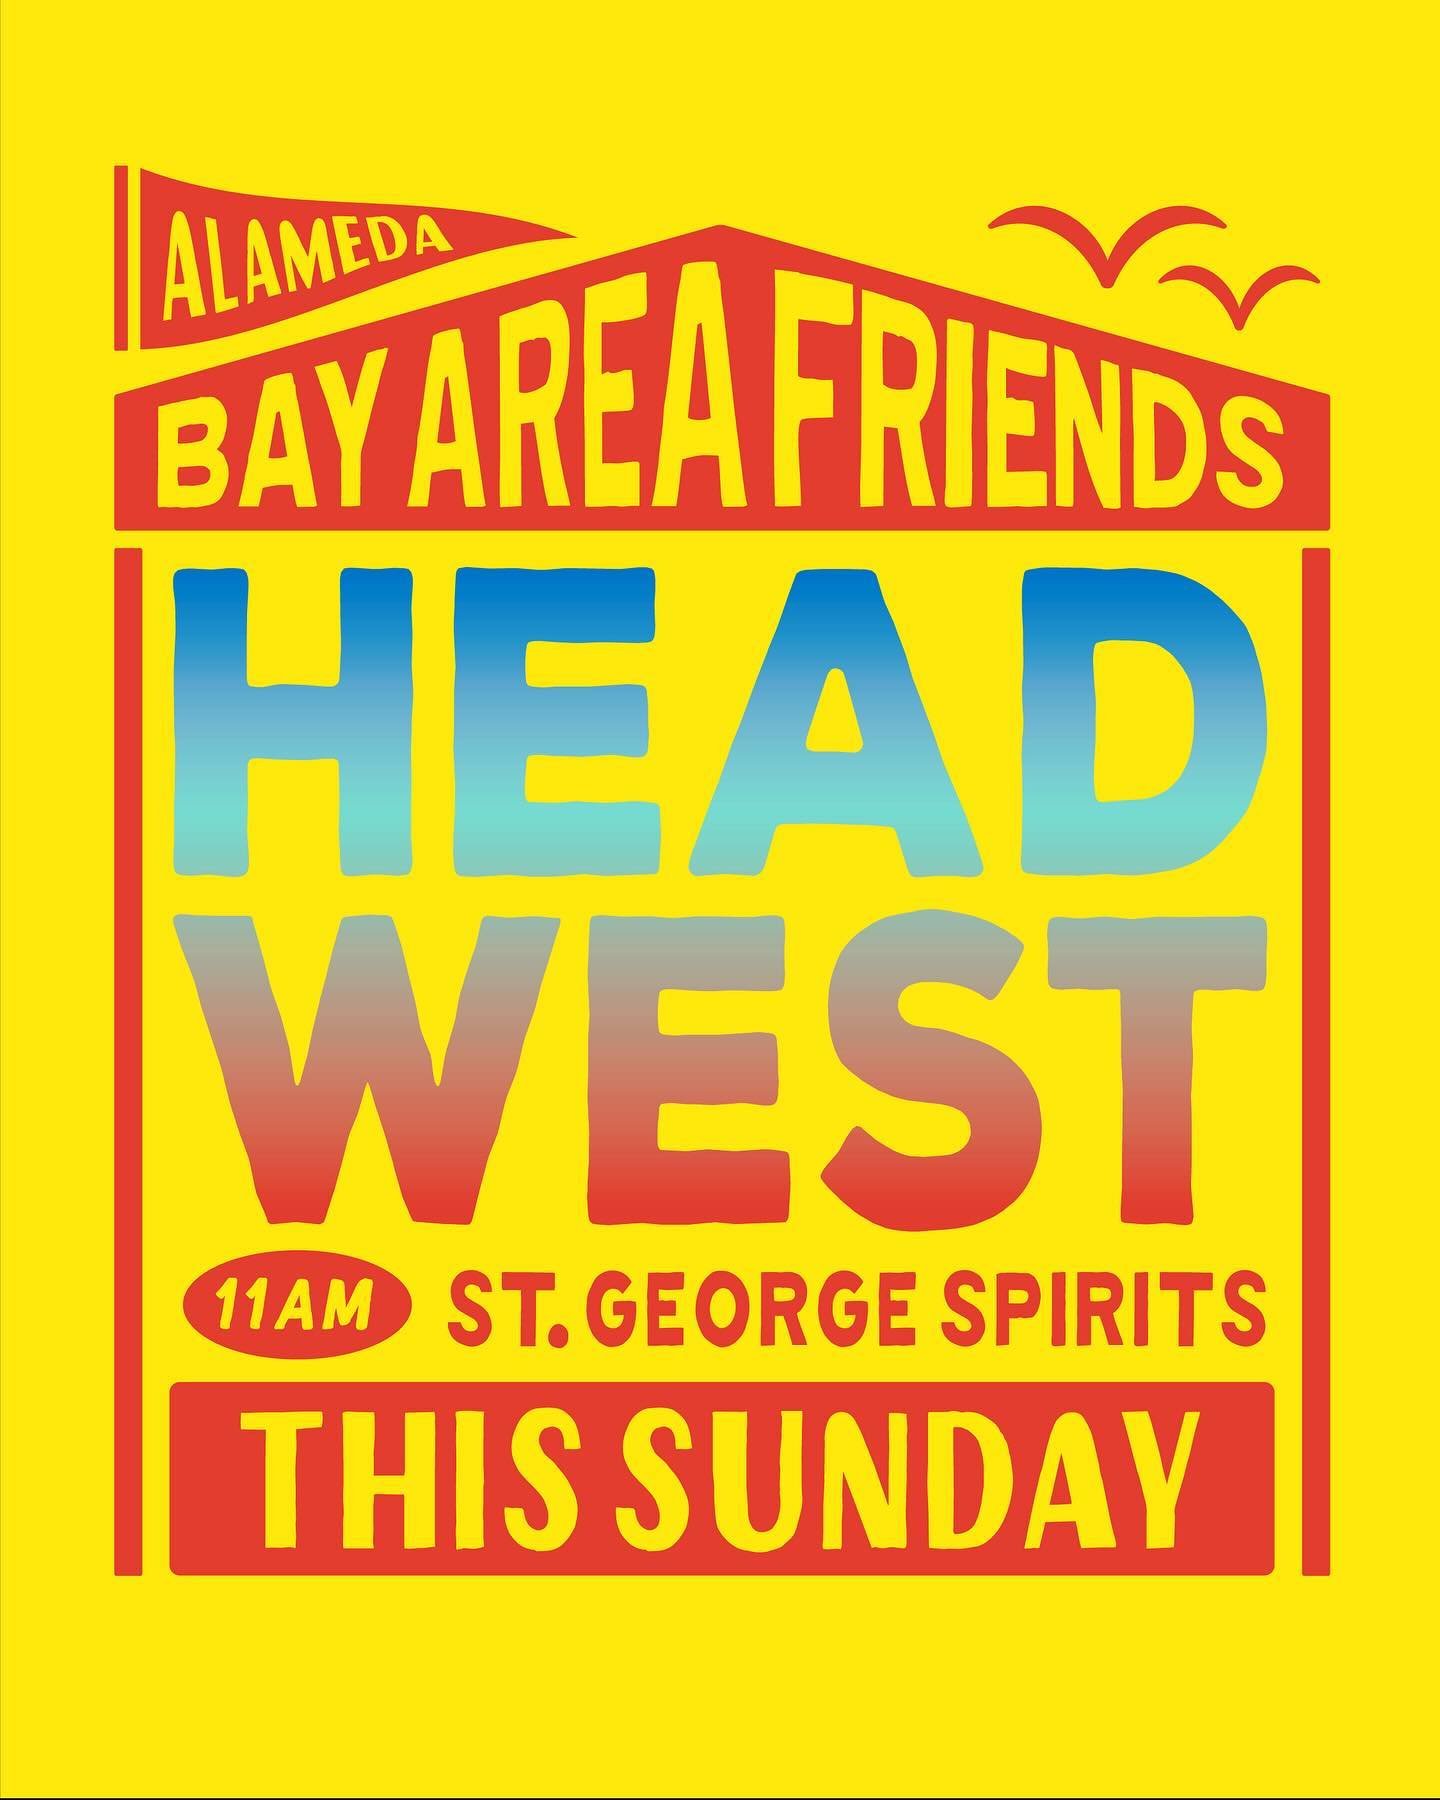 IT&rsquo;S ALMOST HERE&hellip; 
.
The perfect East Bay Sunday with HEAD WEST! 🌞 Join us under sunny skies this SUNDAY, April 21st th from 11a - 5p as we return to @stgeorgespirits in Spirits Alley on Alameda Point 🥃🍸
.
📍Located at 2601 Monarch St